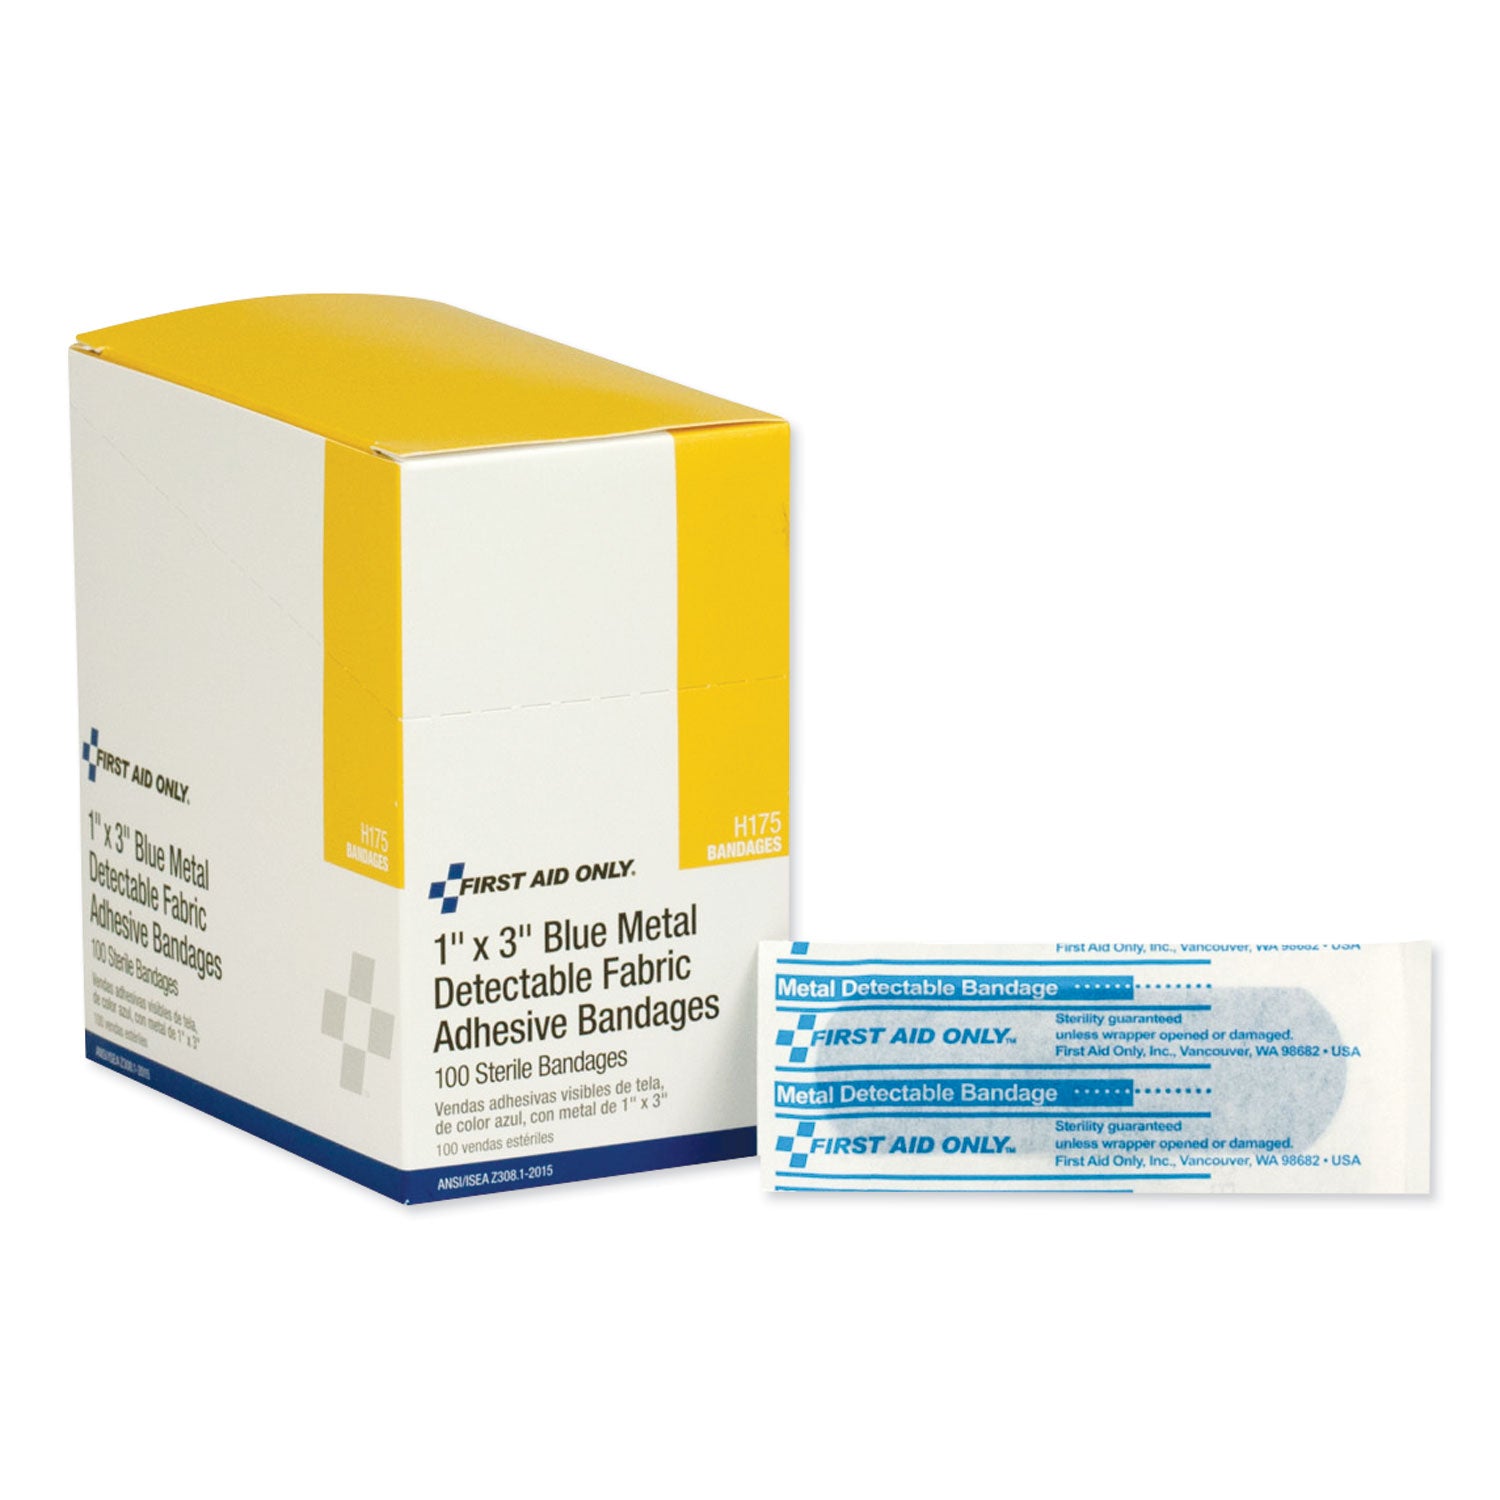 adhesive-blue-metal-detectable-bandages-1-x-3-plastic-with-foil-100-box-12-boxes-carton_faoh175 - 2